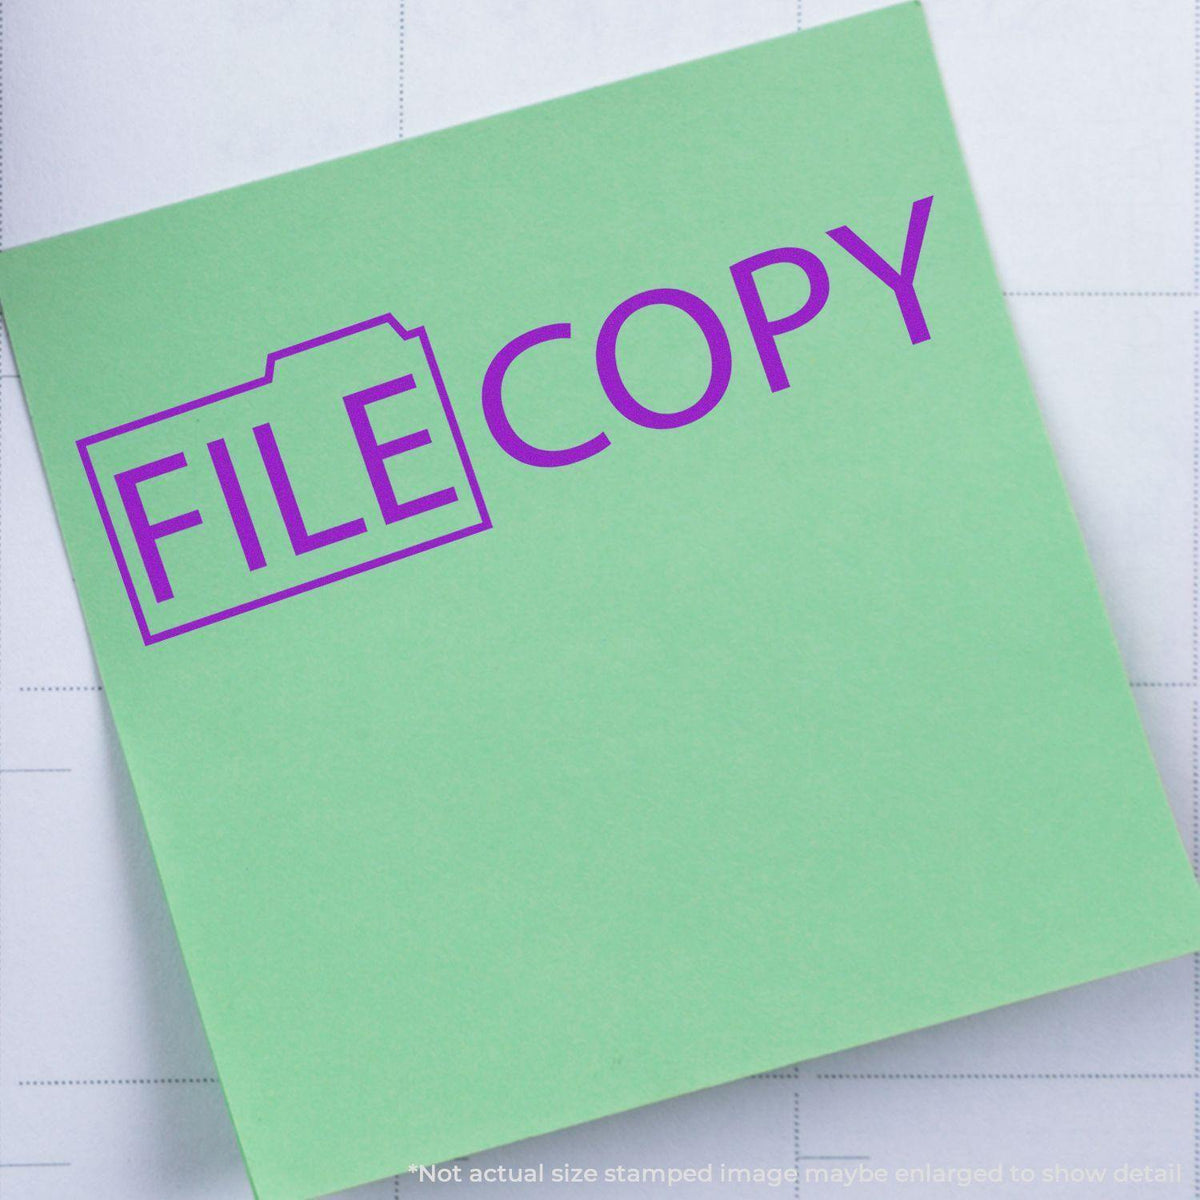 In Use Large Pre-Inked File Copy with Folder Stamp Image